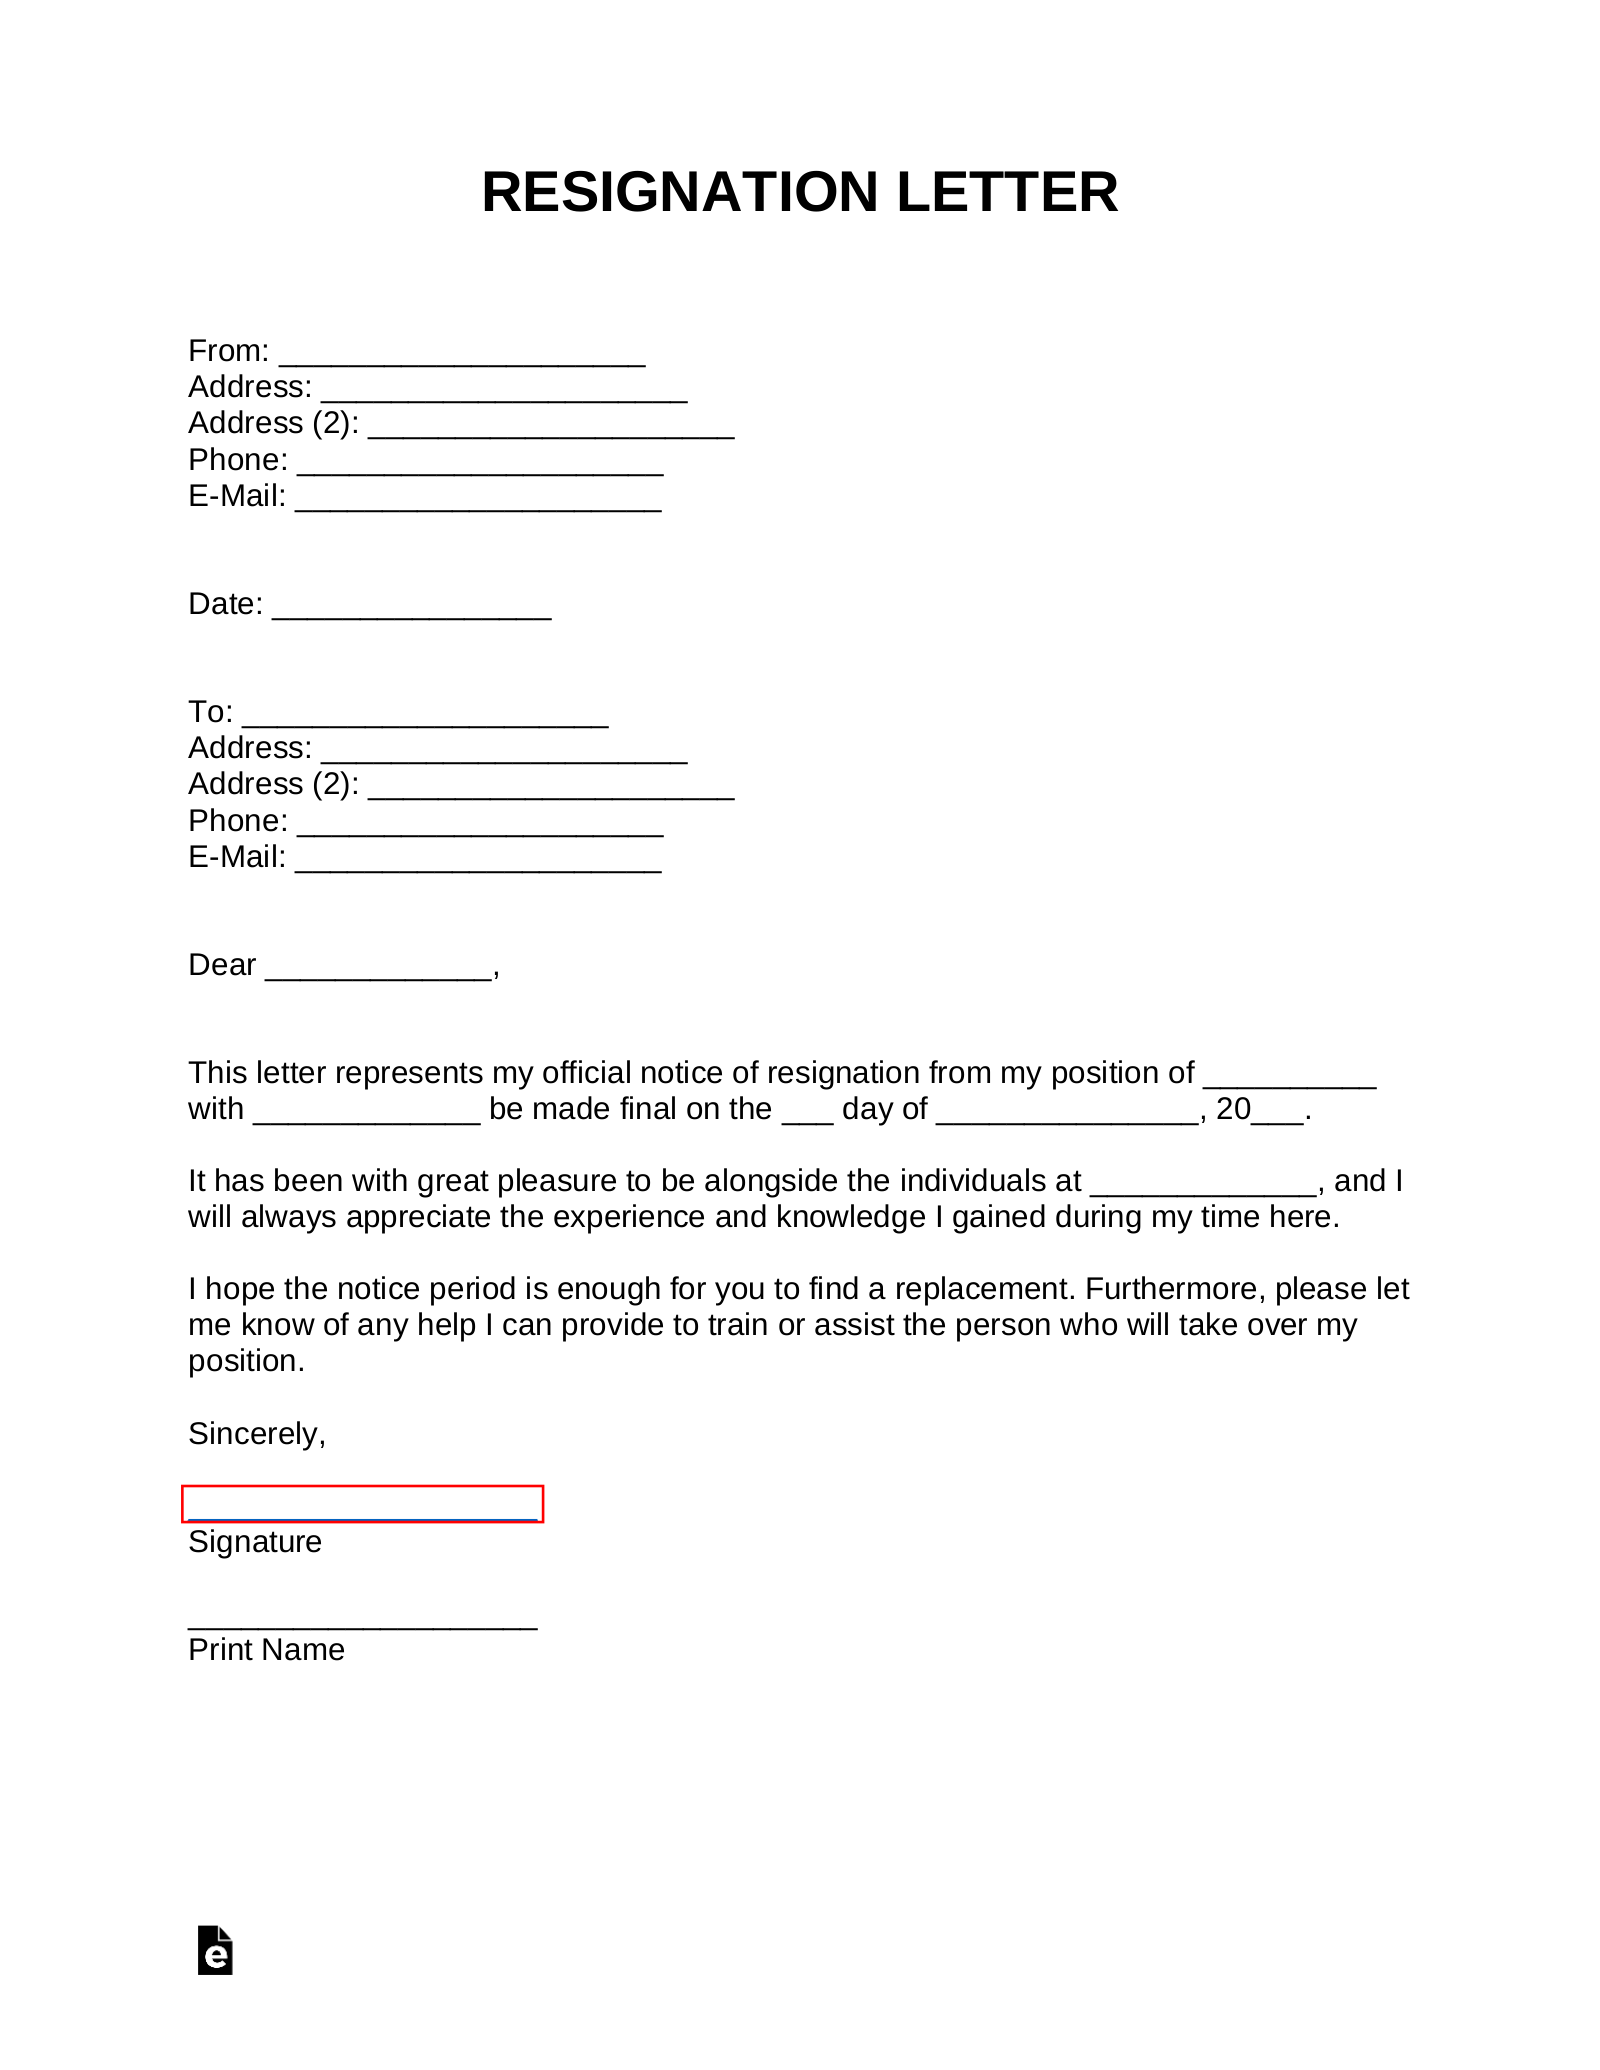 Letter Of Resignation Forms from eforms.com